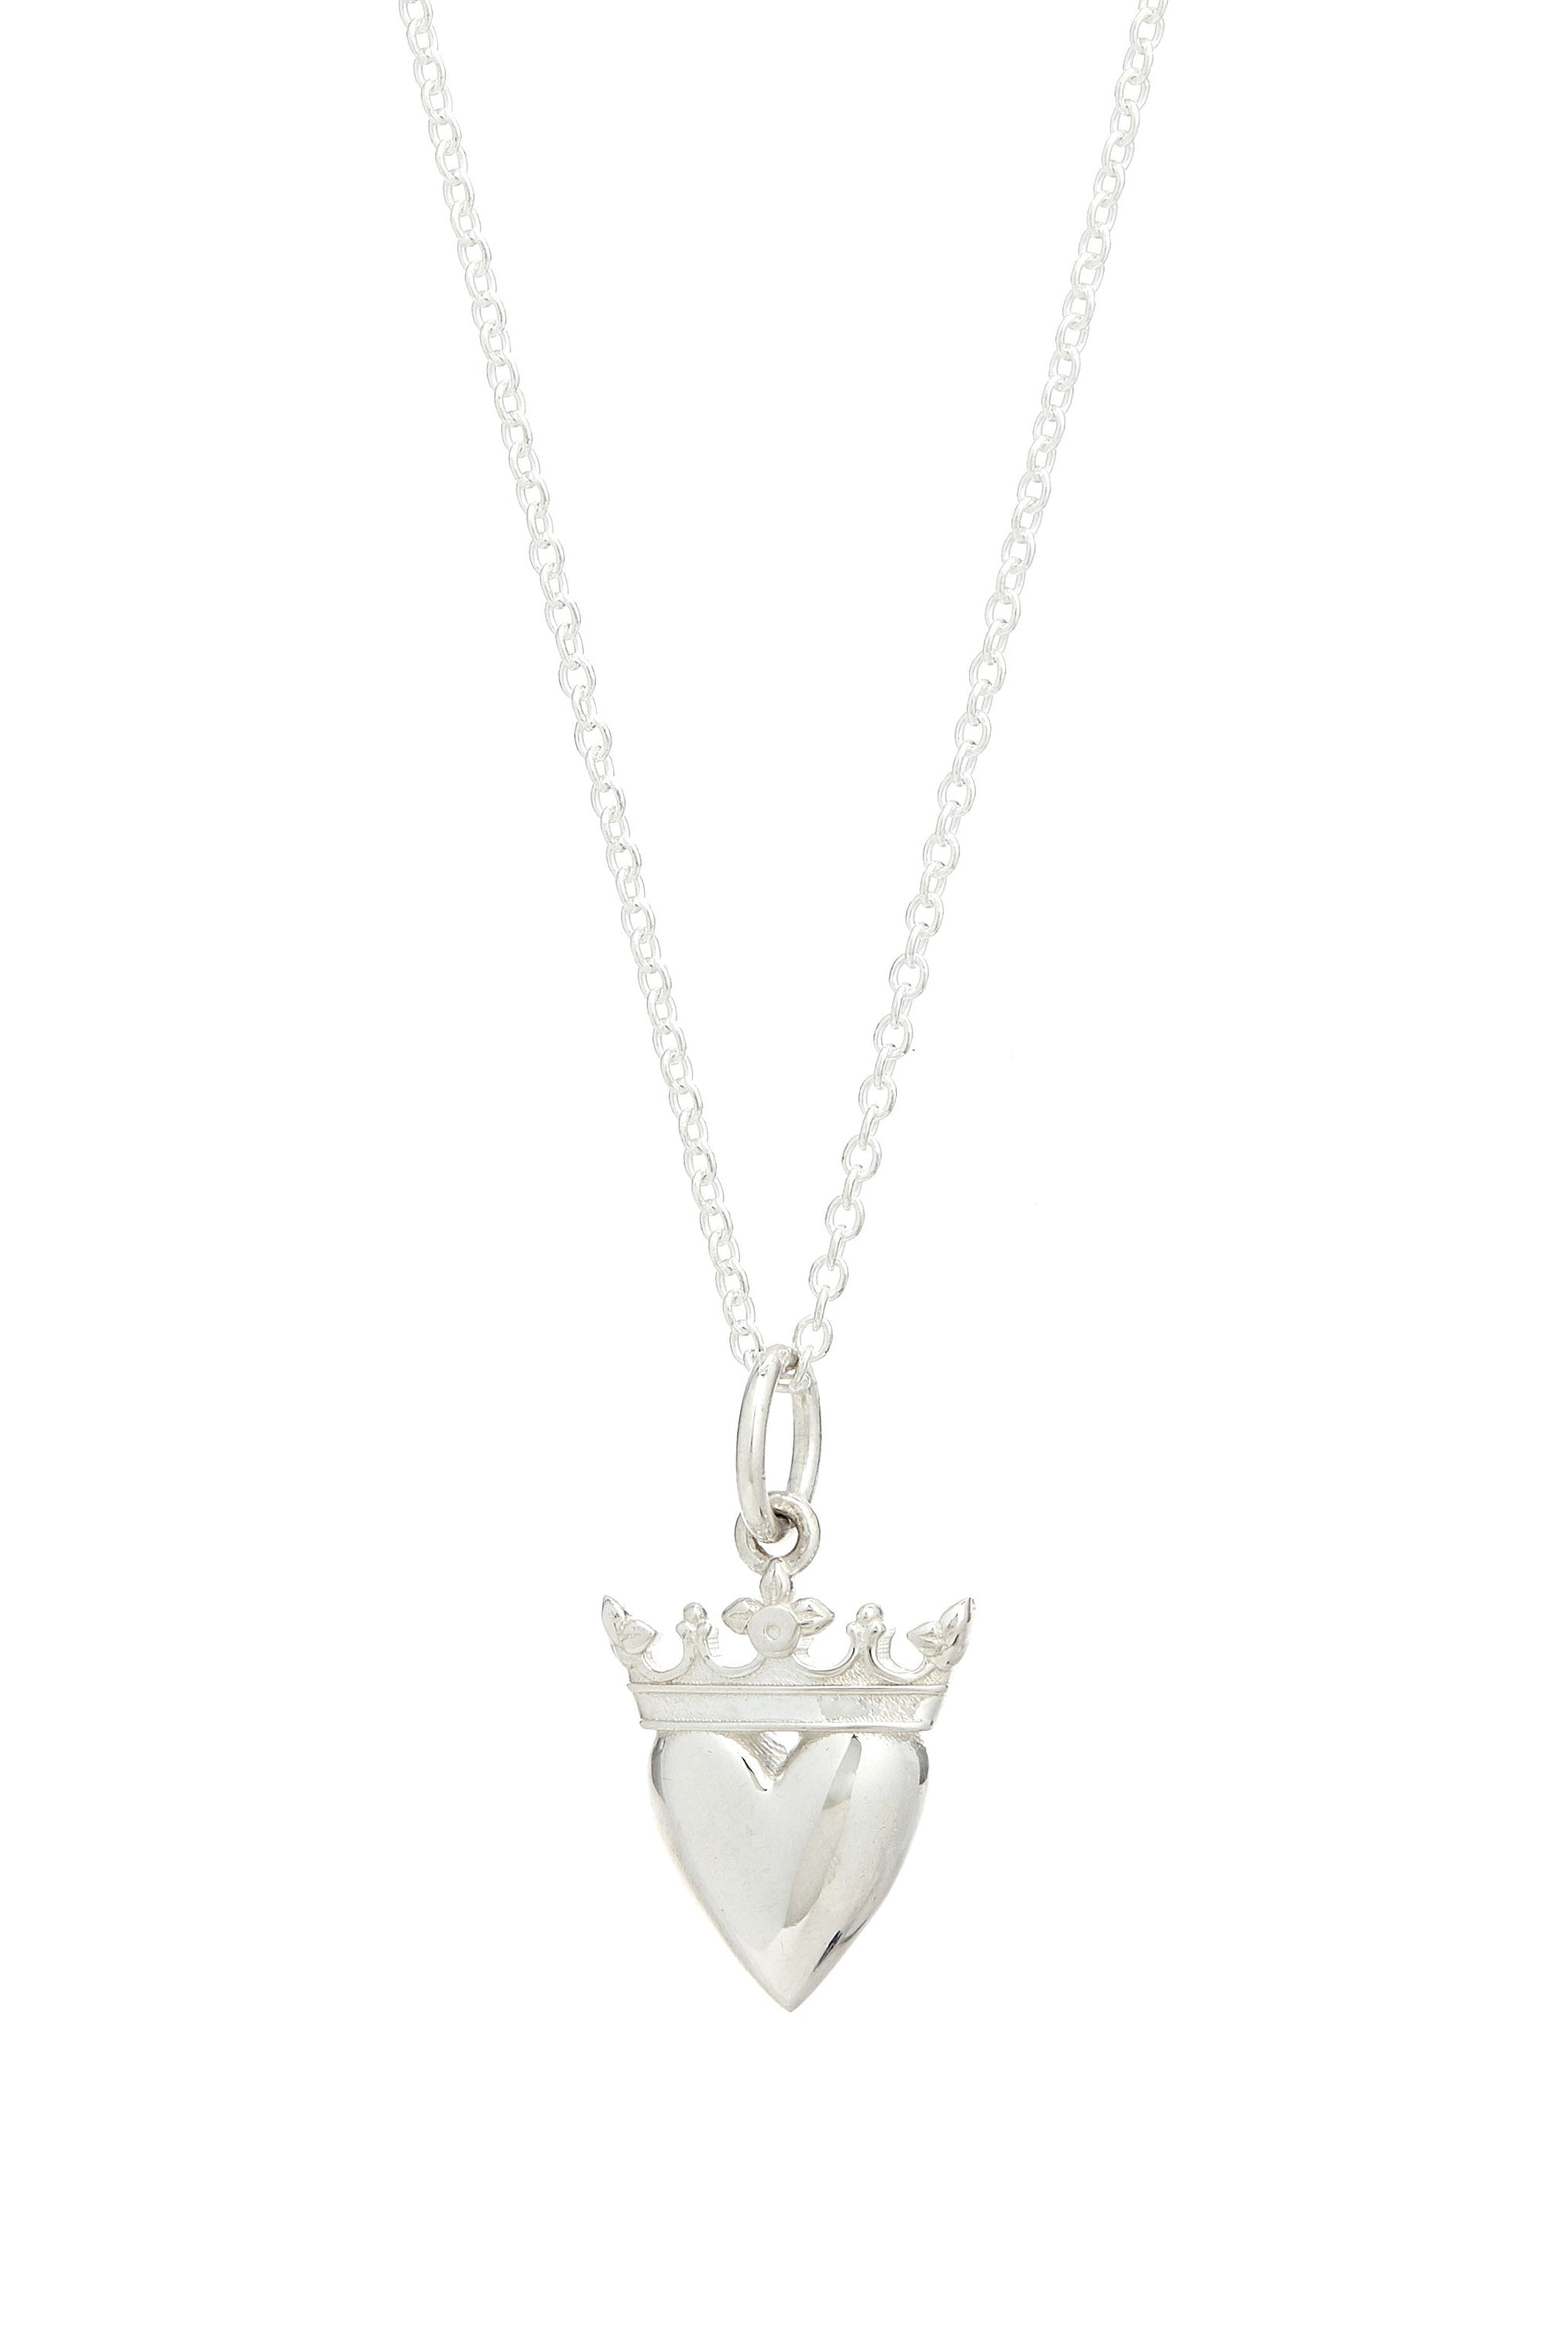 Crowned Heart Pendant Necklace in Sterling Silver